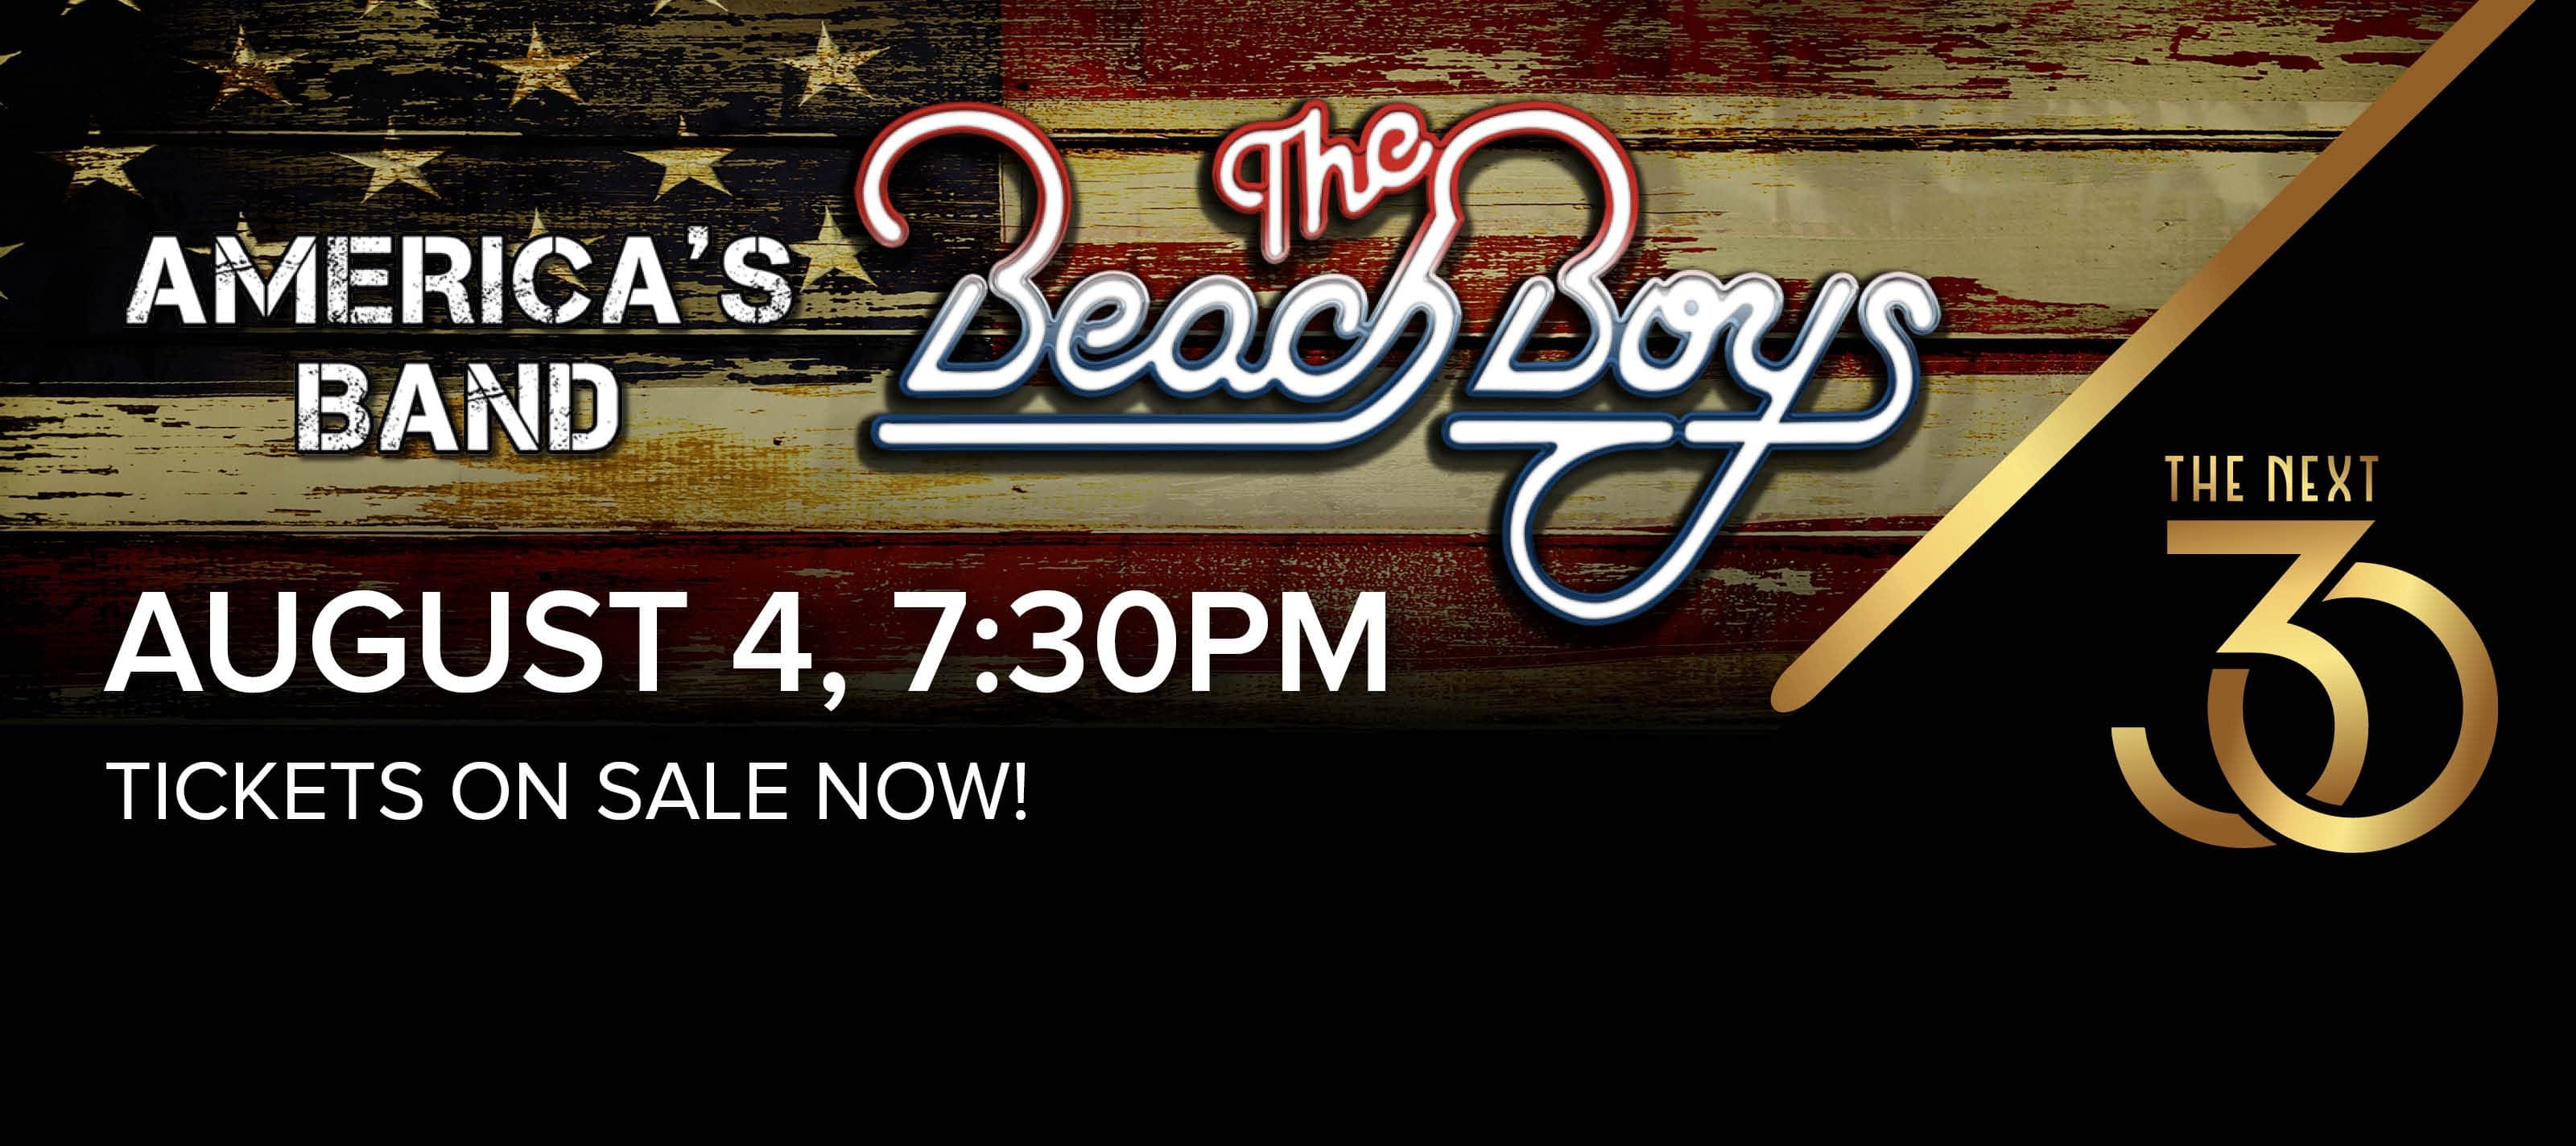 The Beach Boys - America's Band August 4 at 7:30pm - Tickets On Sale Now